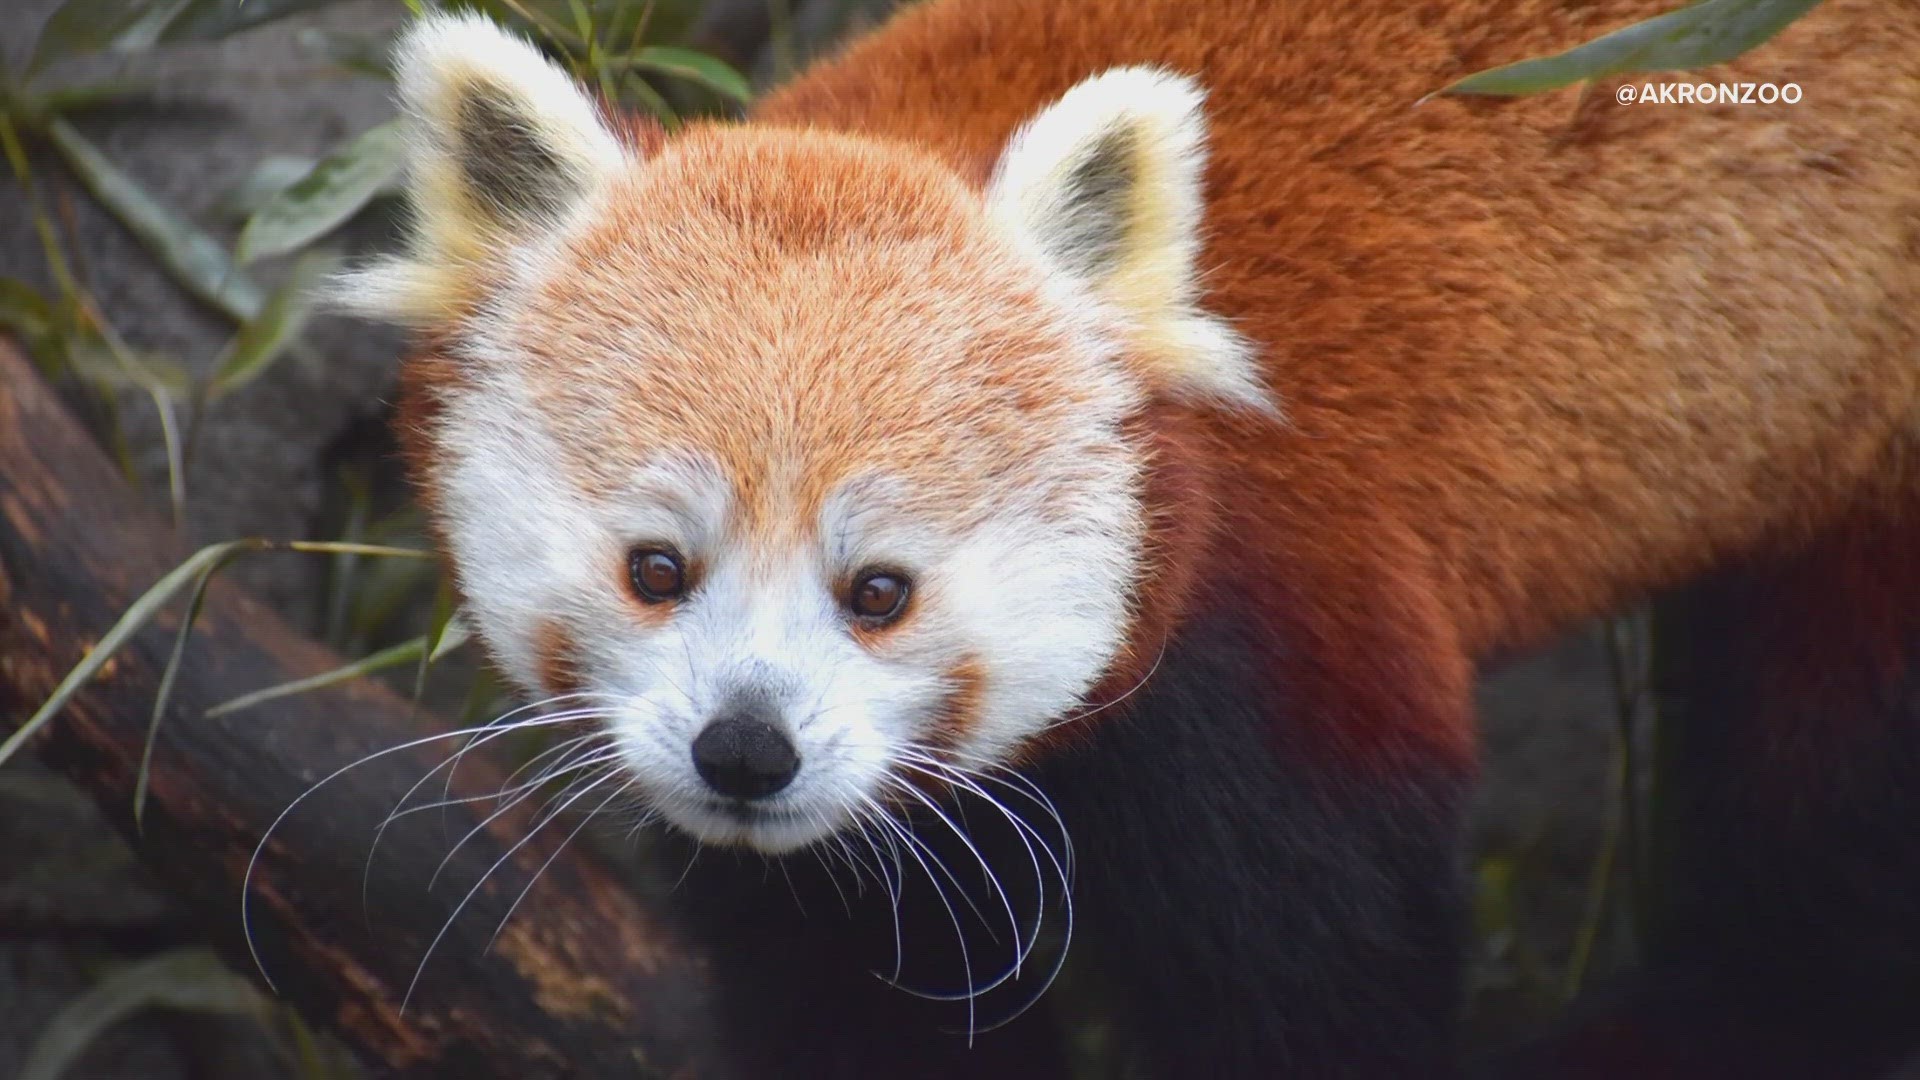 Penny was a star featured in the Akron Zoo's Panda Palace web series.